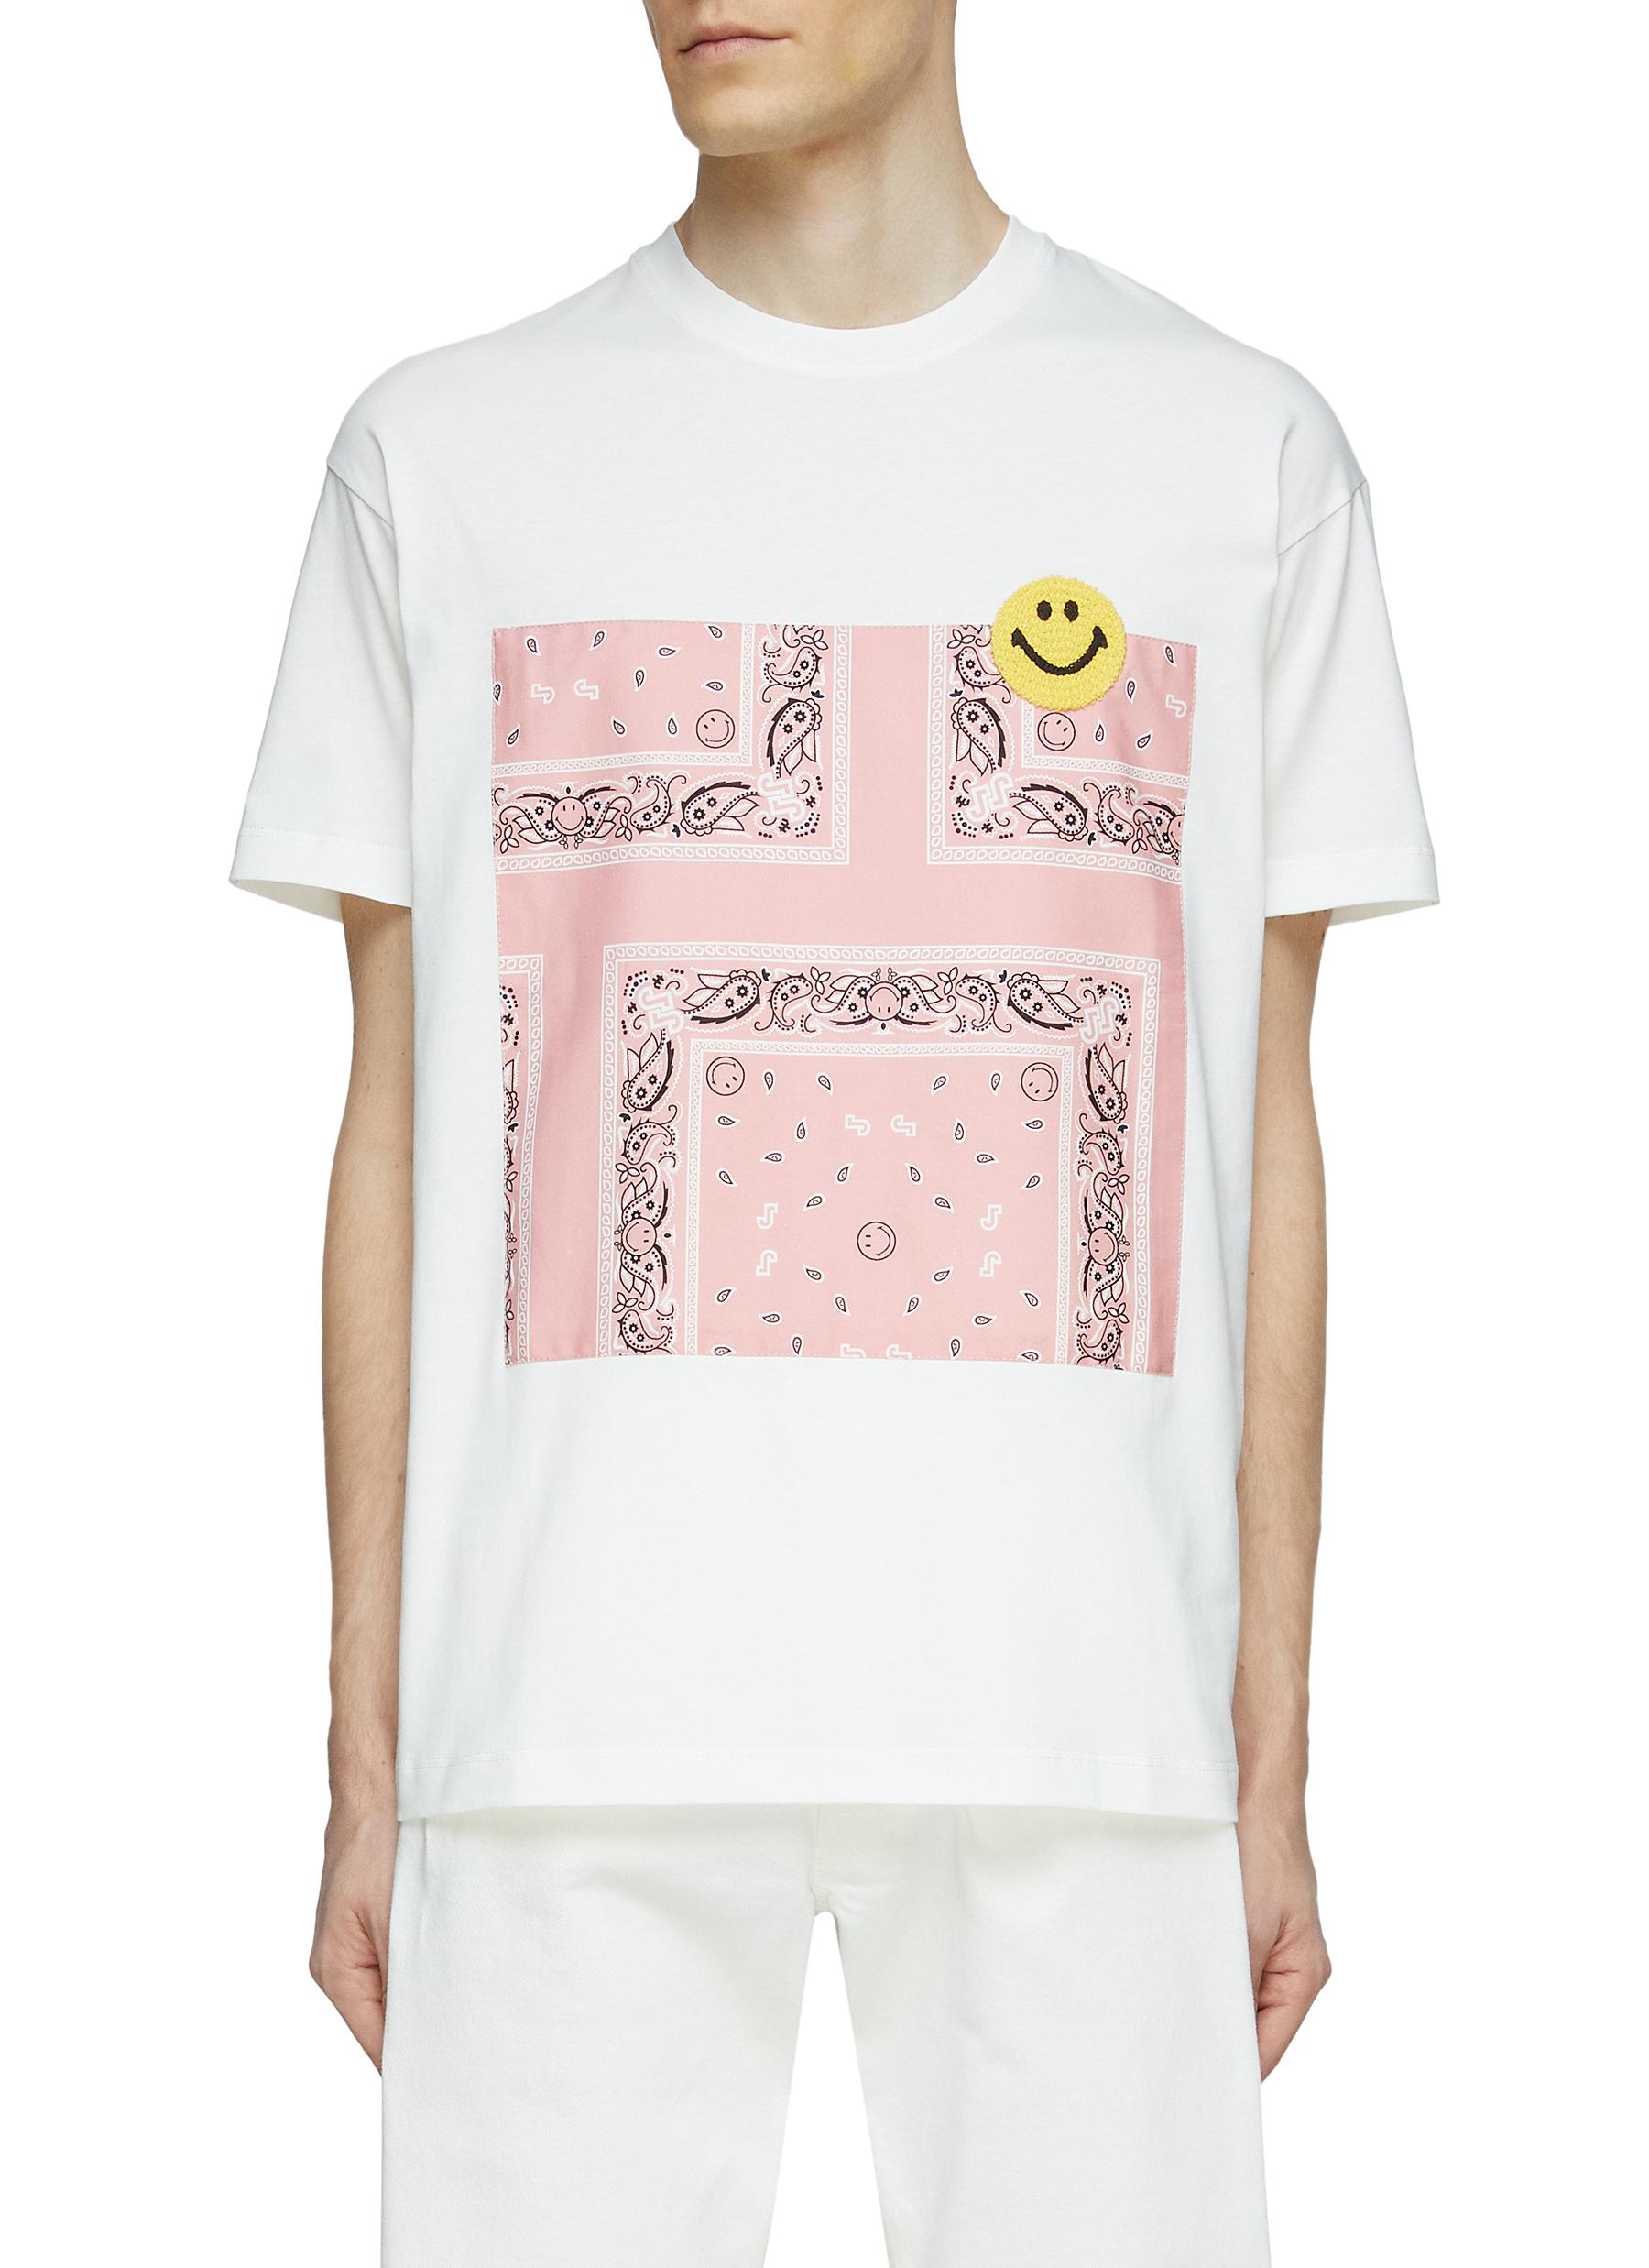 JOSHUA'S BANDANA PATCH WITH STITCHED SMILEY FACE CREWNECK T-SHIRT